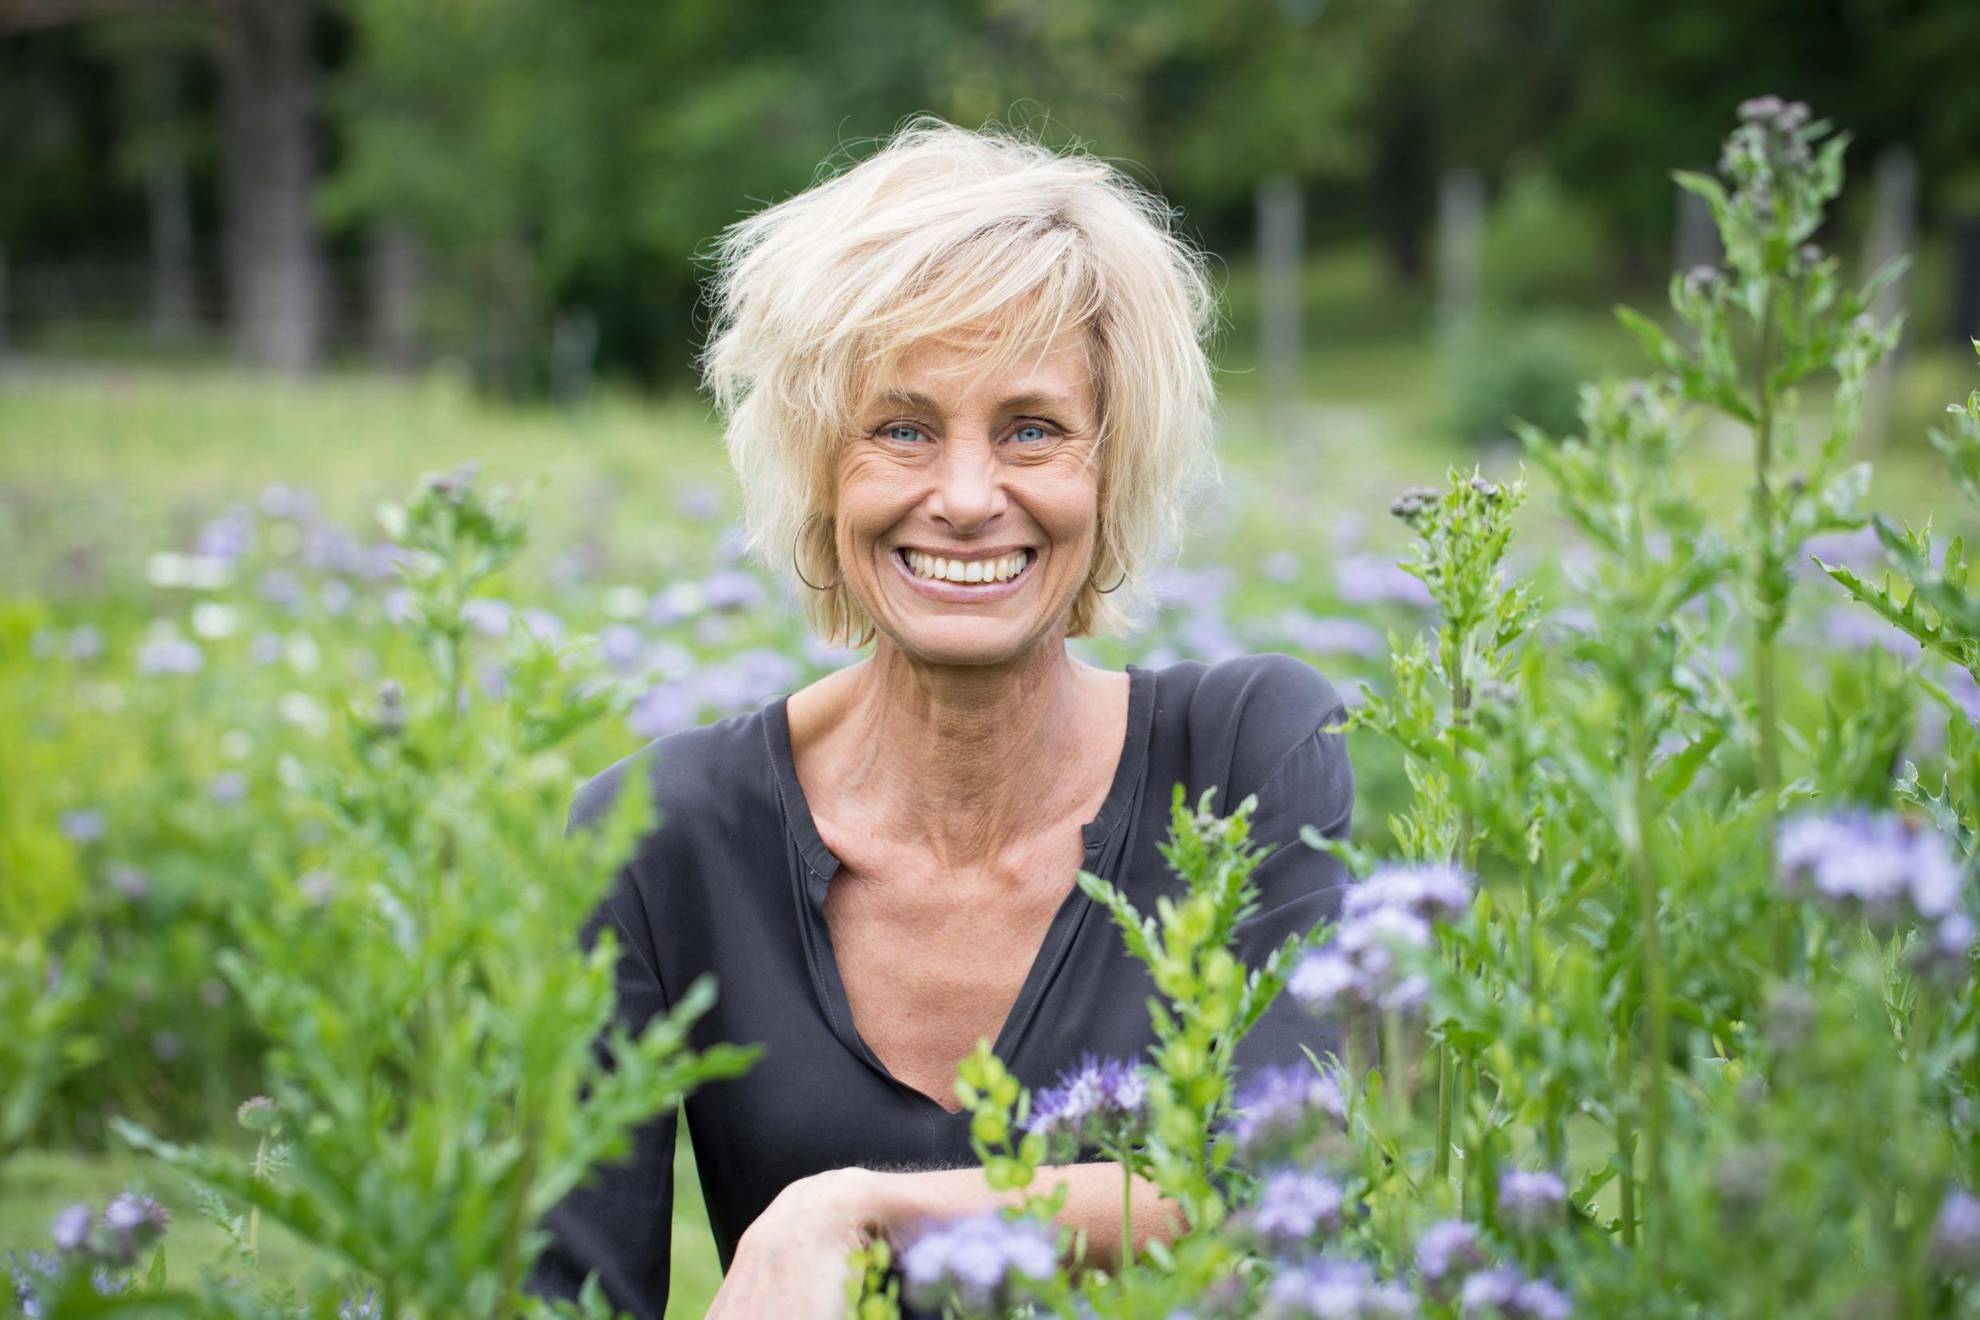 A portrait of Lisen Sundgren in nature surrounded by greenery. She is smiling into the camera.